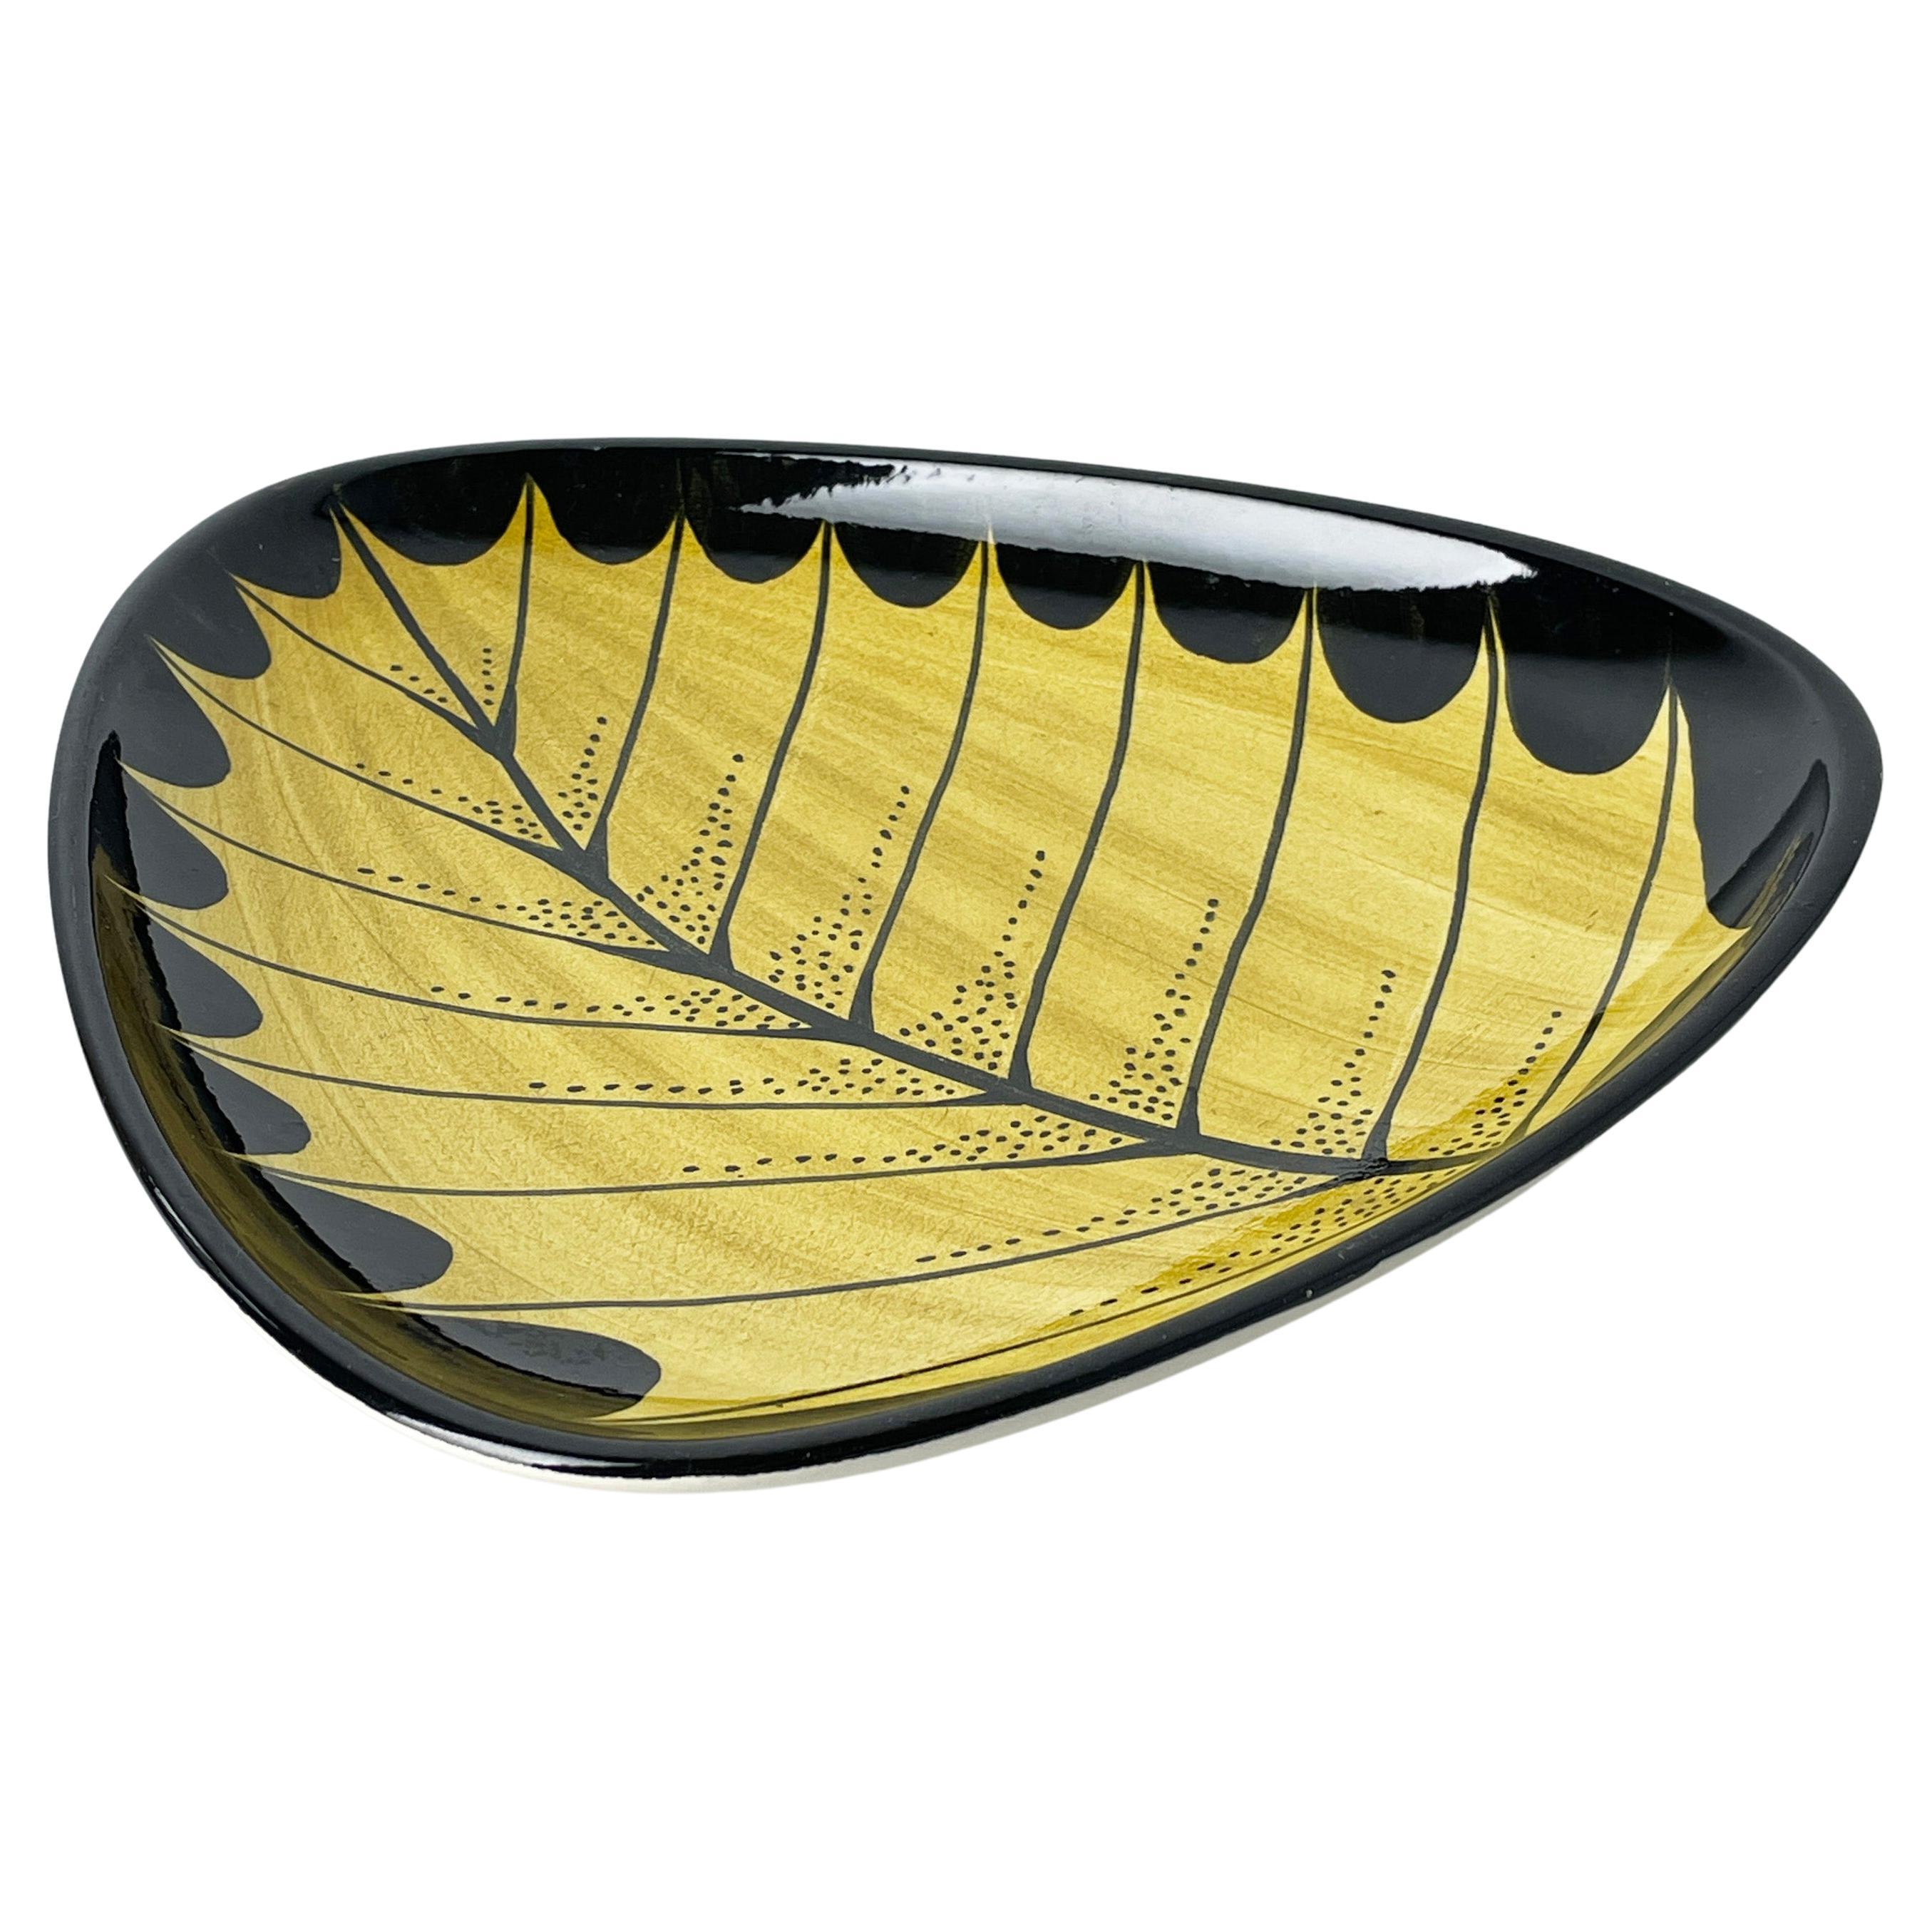 Decorative triangular shaped ceramic bowl / plate produced in the late 1950's to mid 1960s. Features a bold yellow and black leaf pattern. 
Maufacturer's mark on base: 4022 3